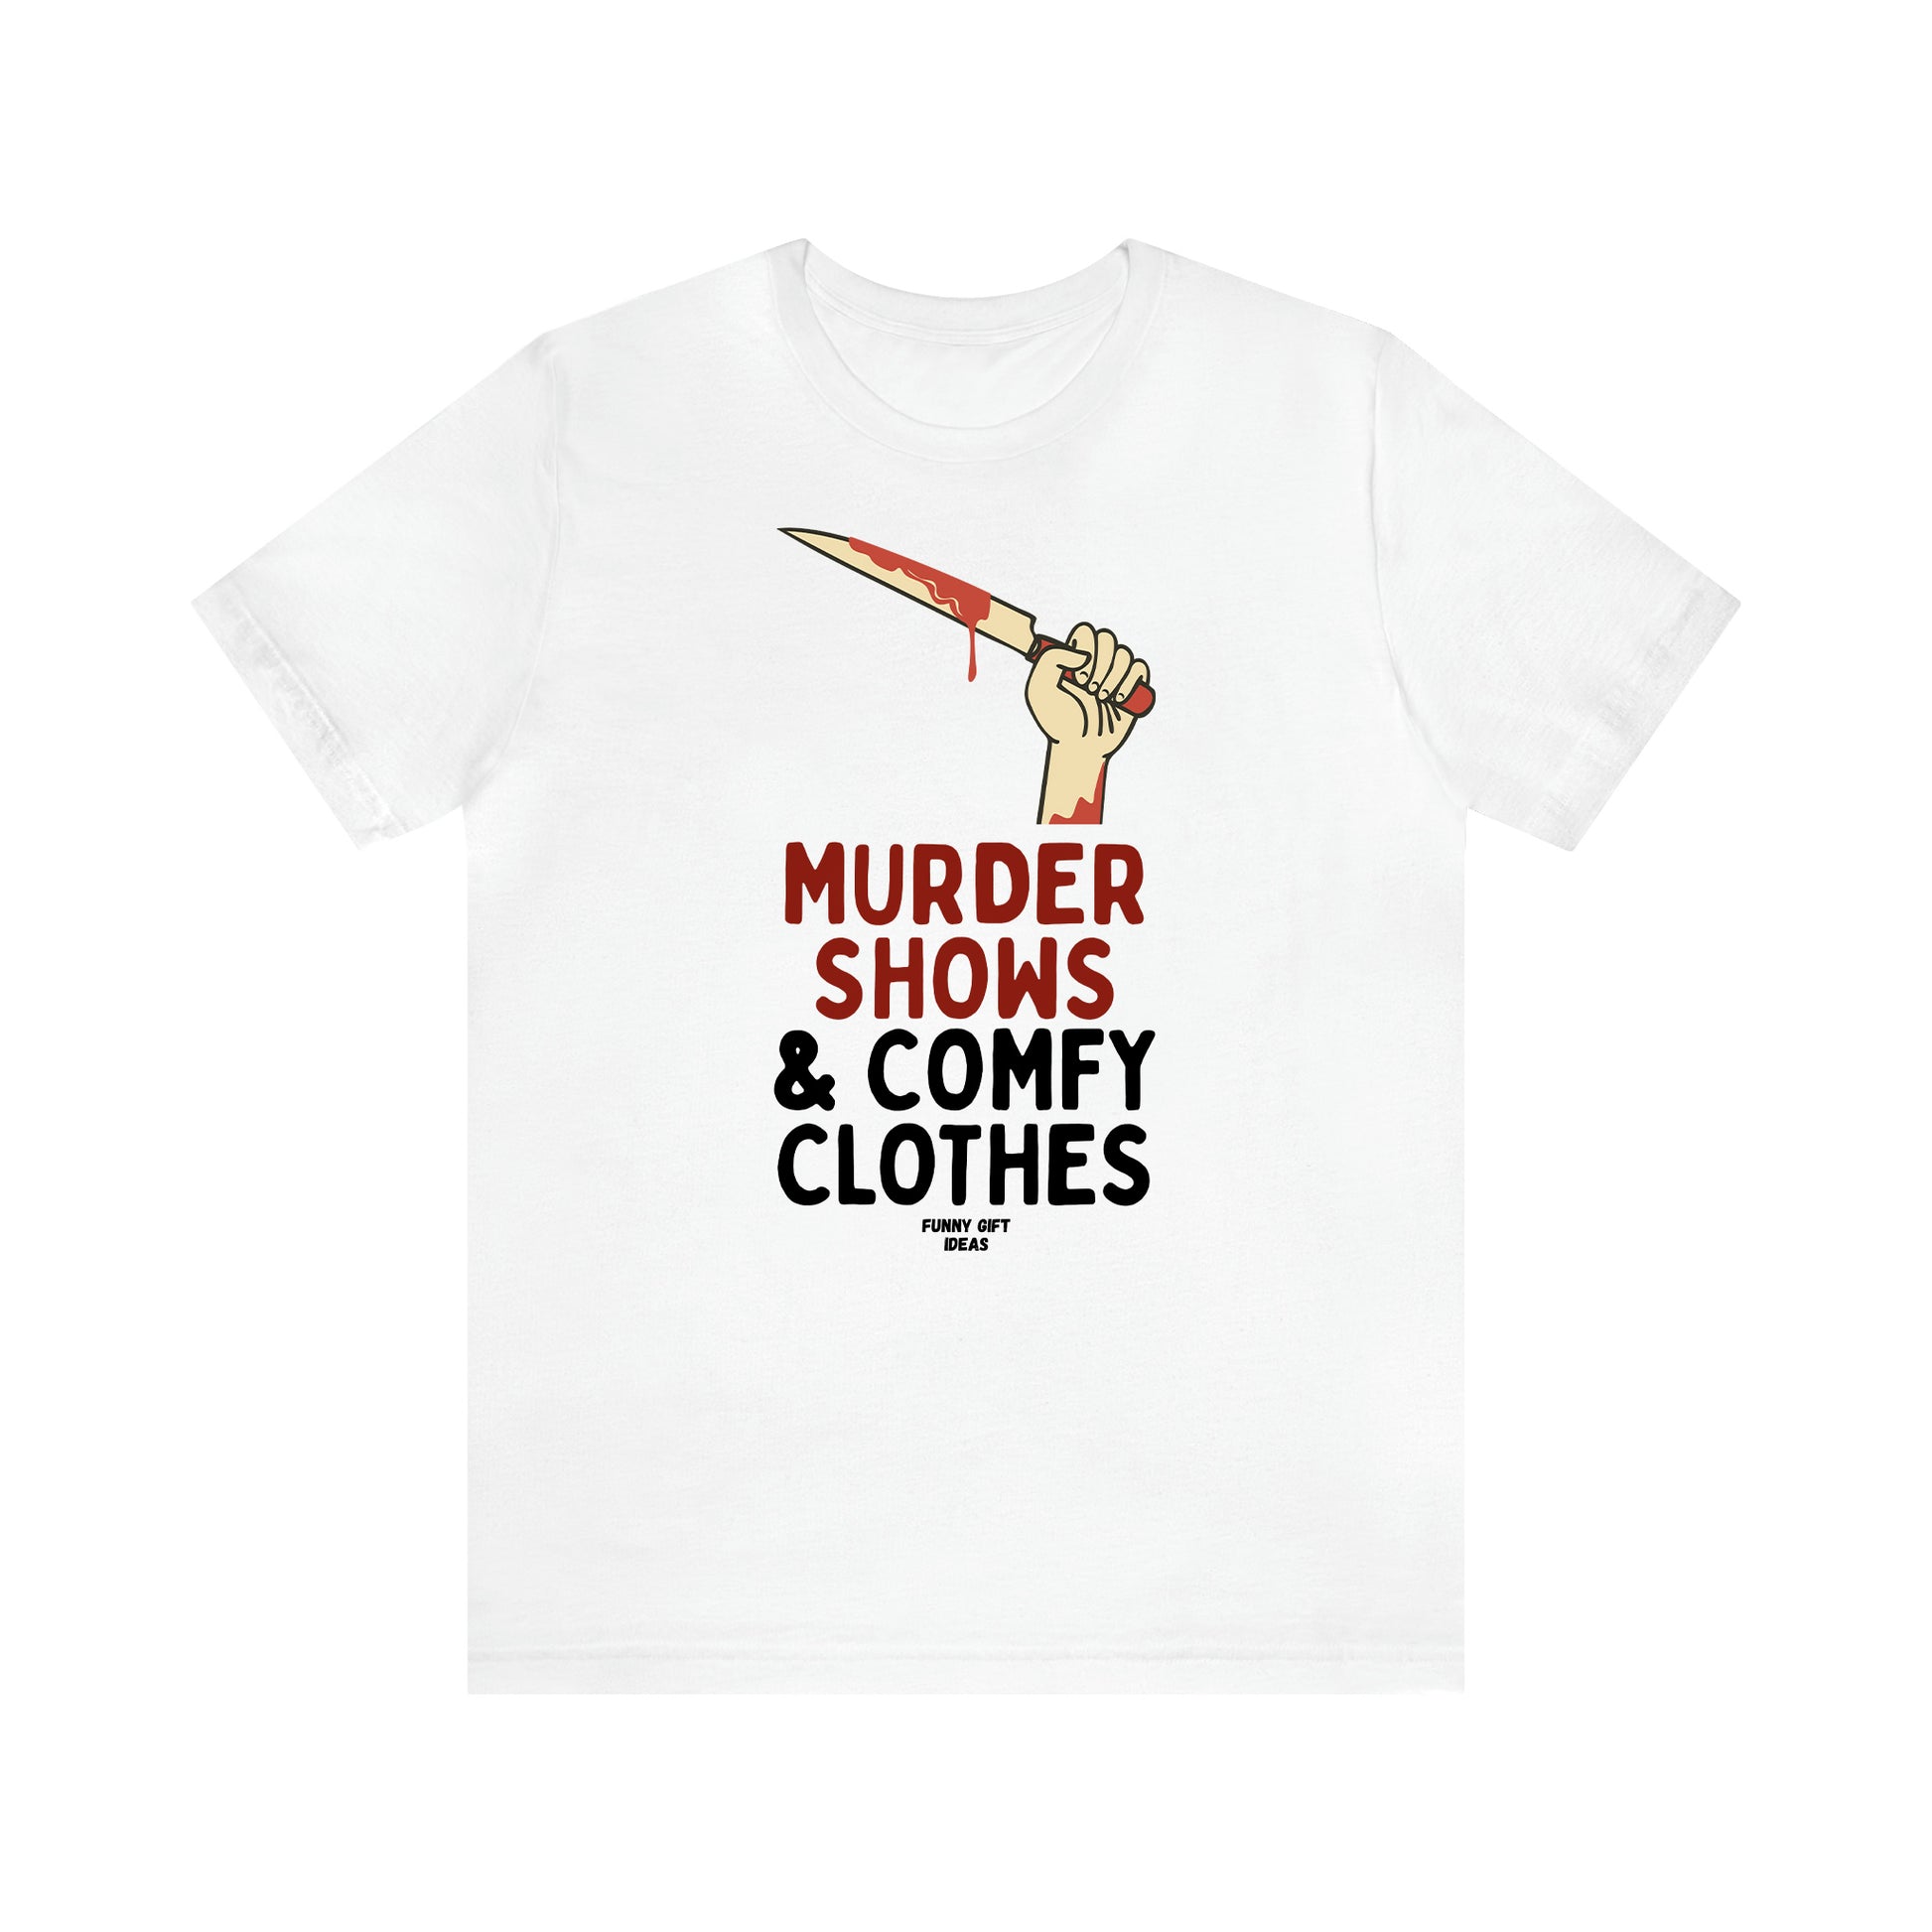 Women's T Shirts Murder Shows & Comfy Clothes - Funny Gift Ideas